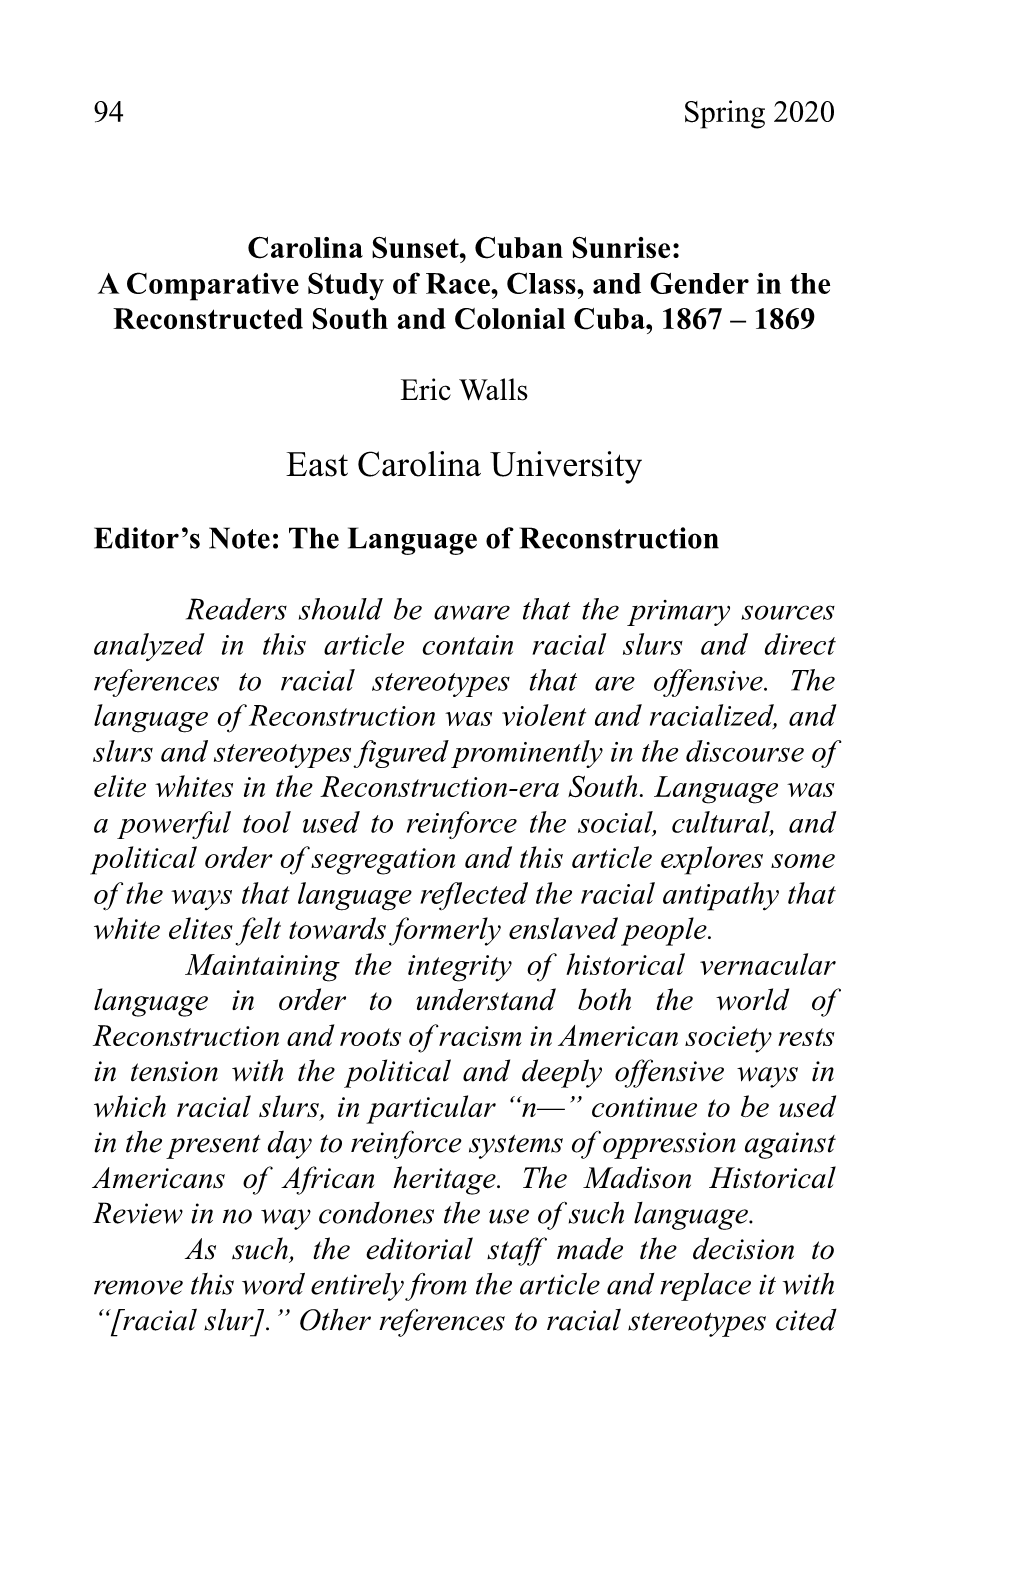 Carolina Sunset, Cuban Sunrise: a Comparative Study of Race, Class, and Gender in the Reconstructed South and Colonial Cuba, 1867 – 1869